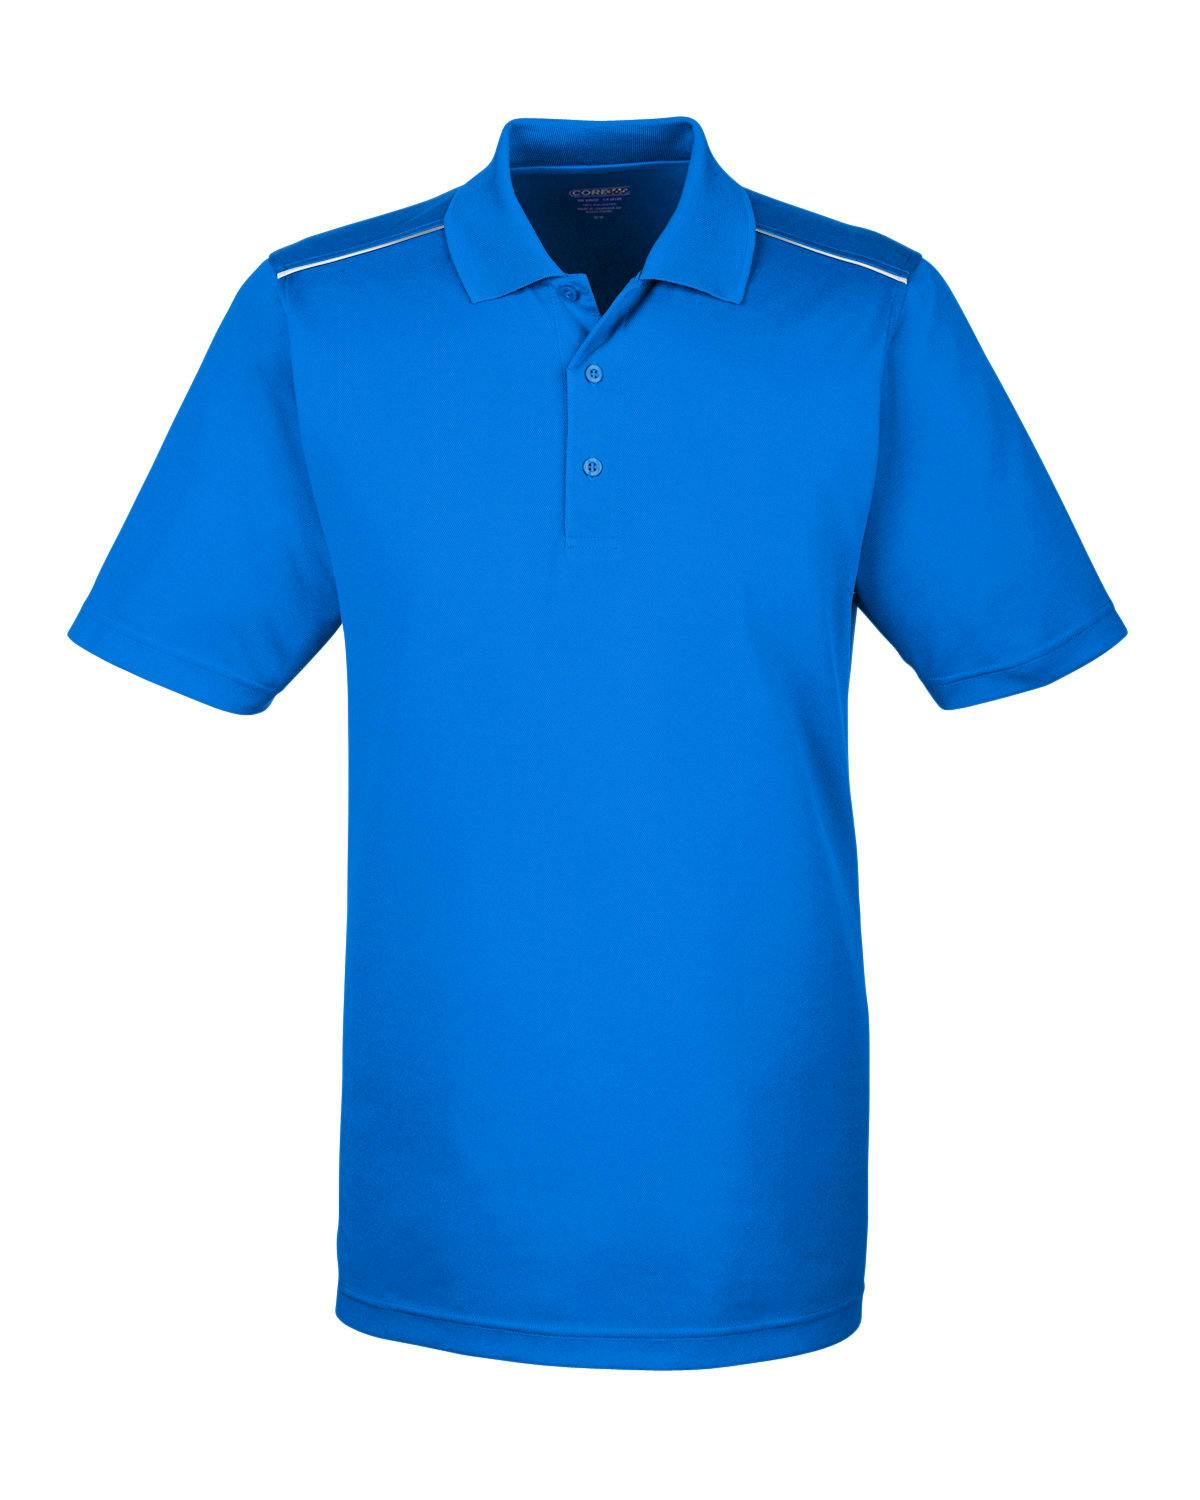 Image for Men's Radiant Performance Piqué Polo with Reflective Piping